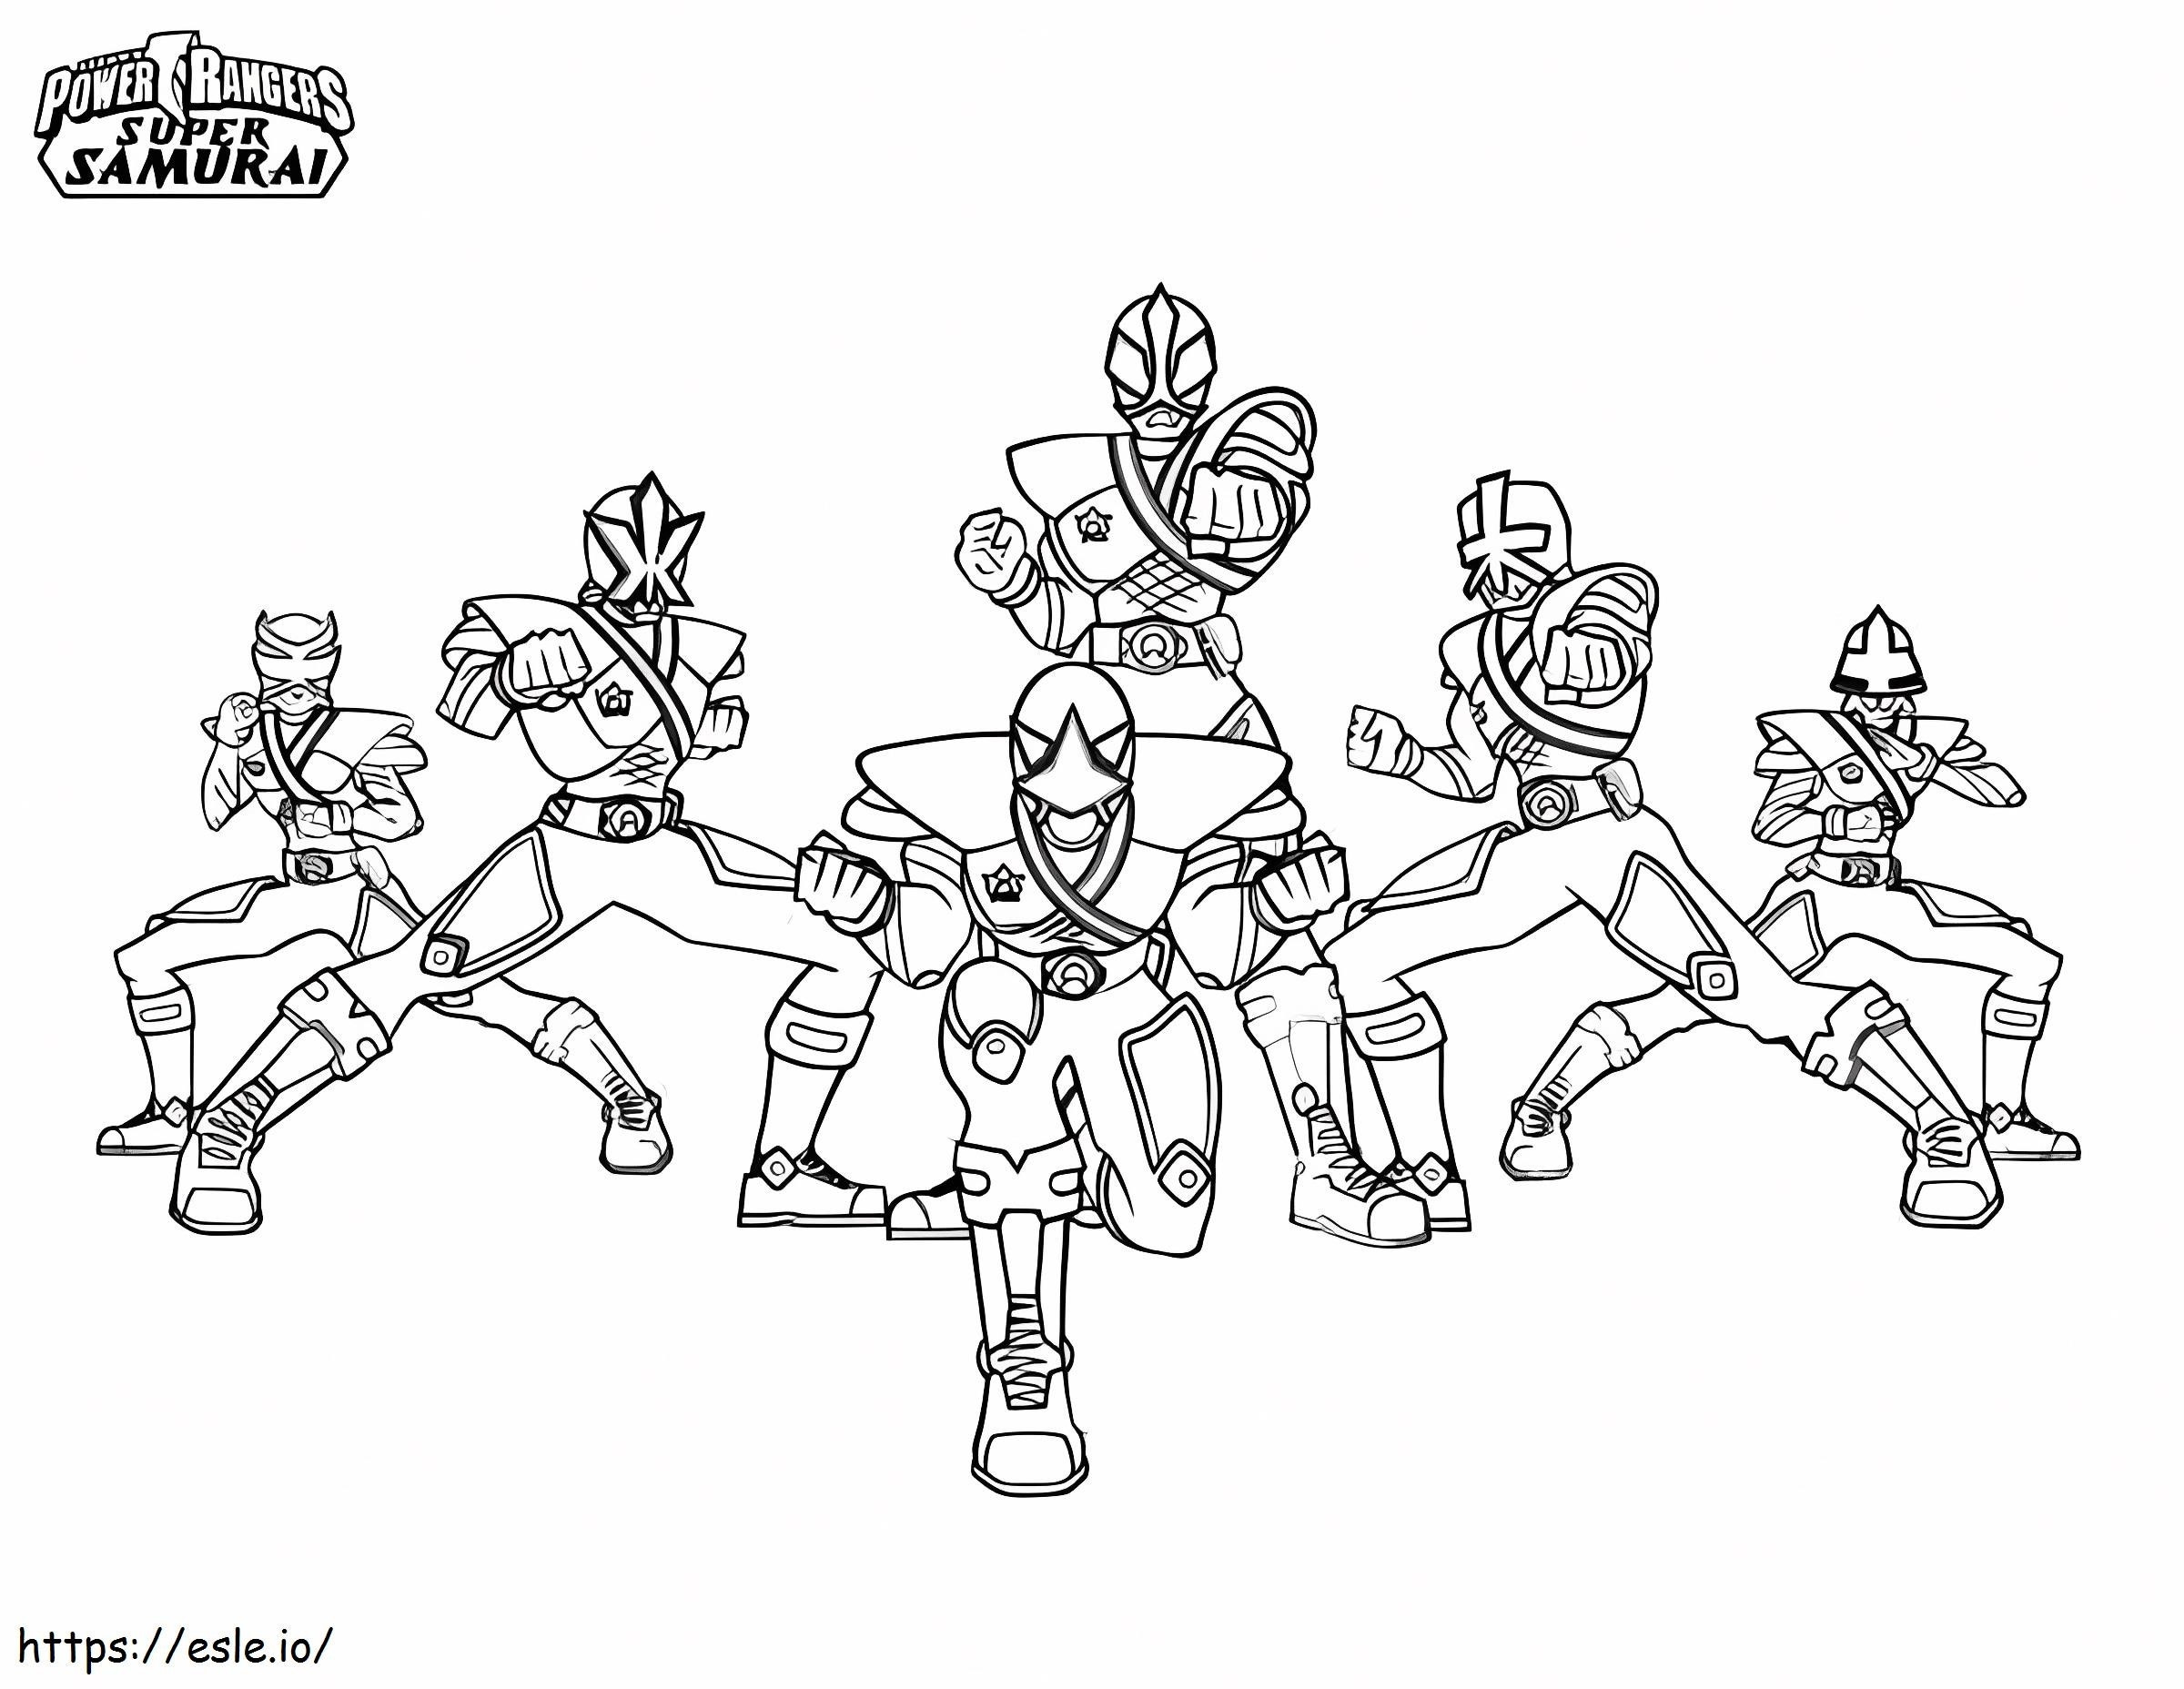 Awesome Samurai Rangers coloring page